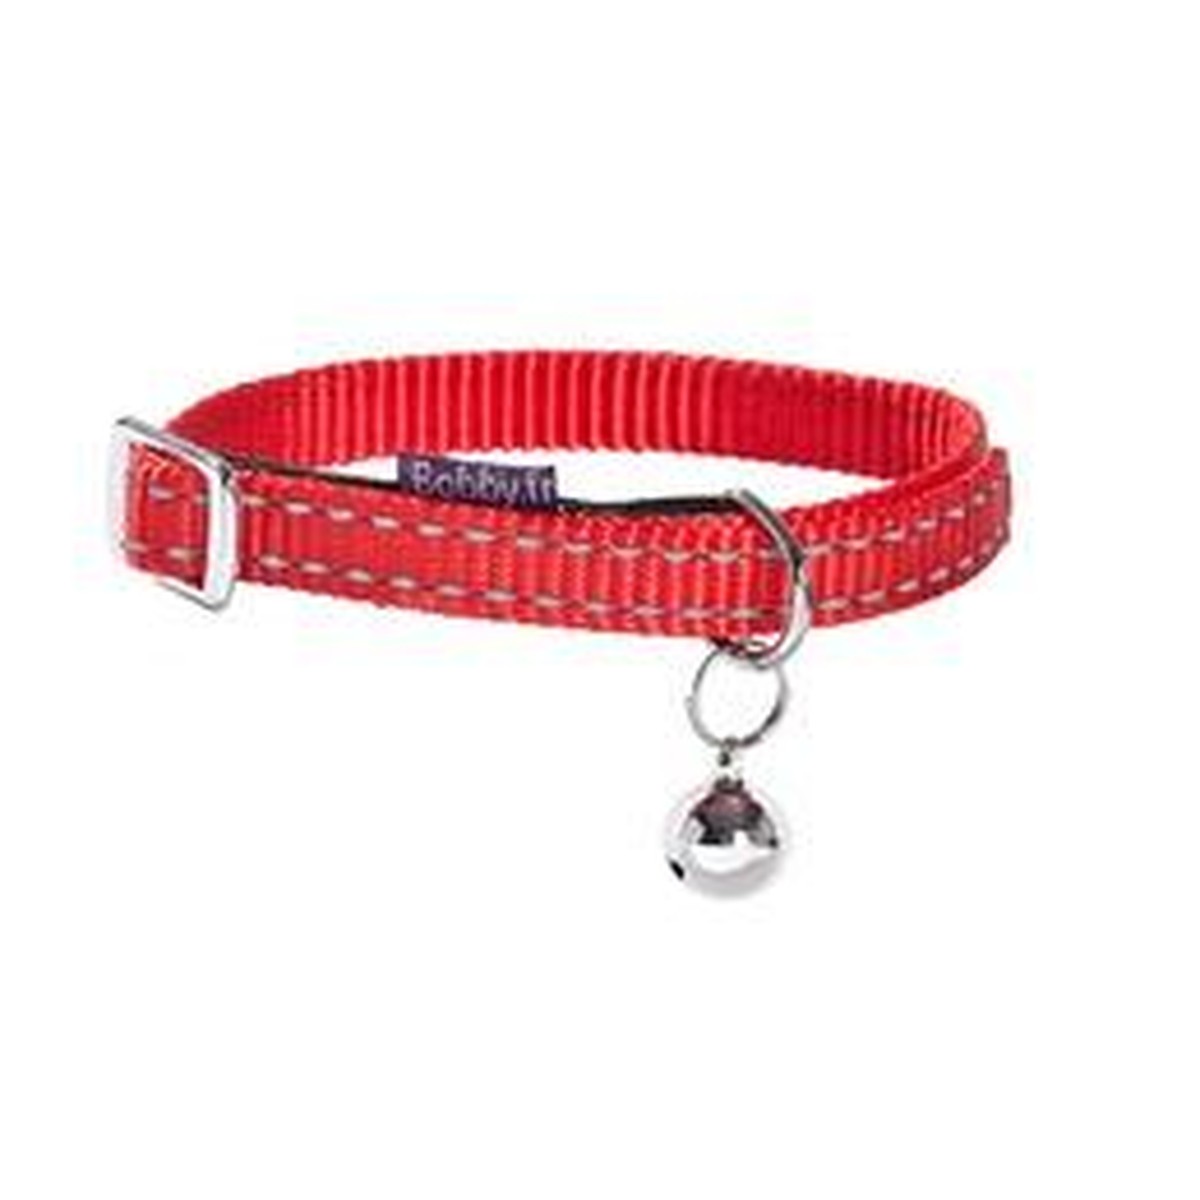 Bobby safe Collier chat safe t10 Rouge magenta ou rouge primaire 10